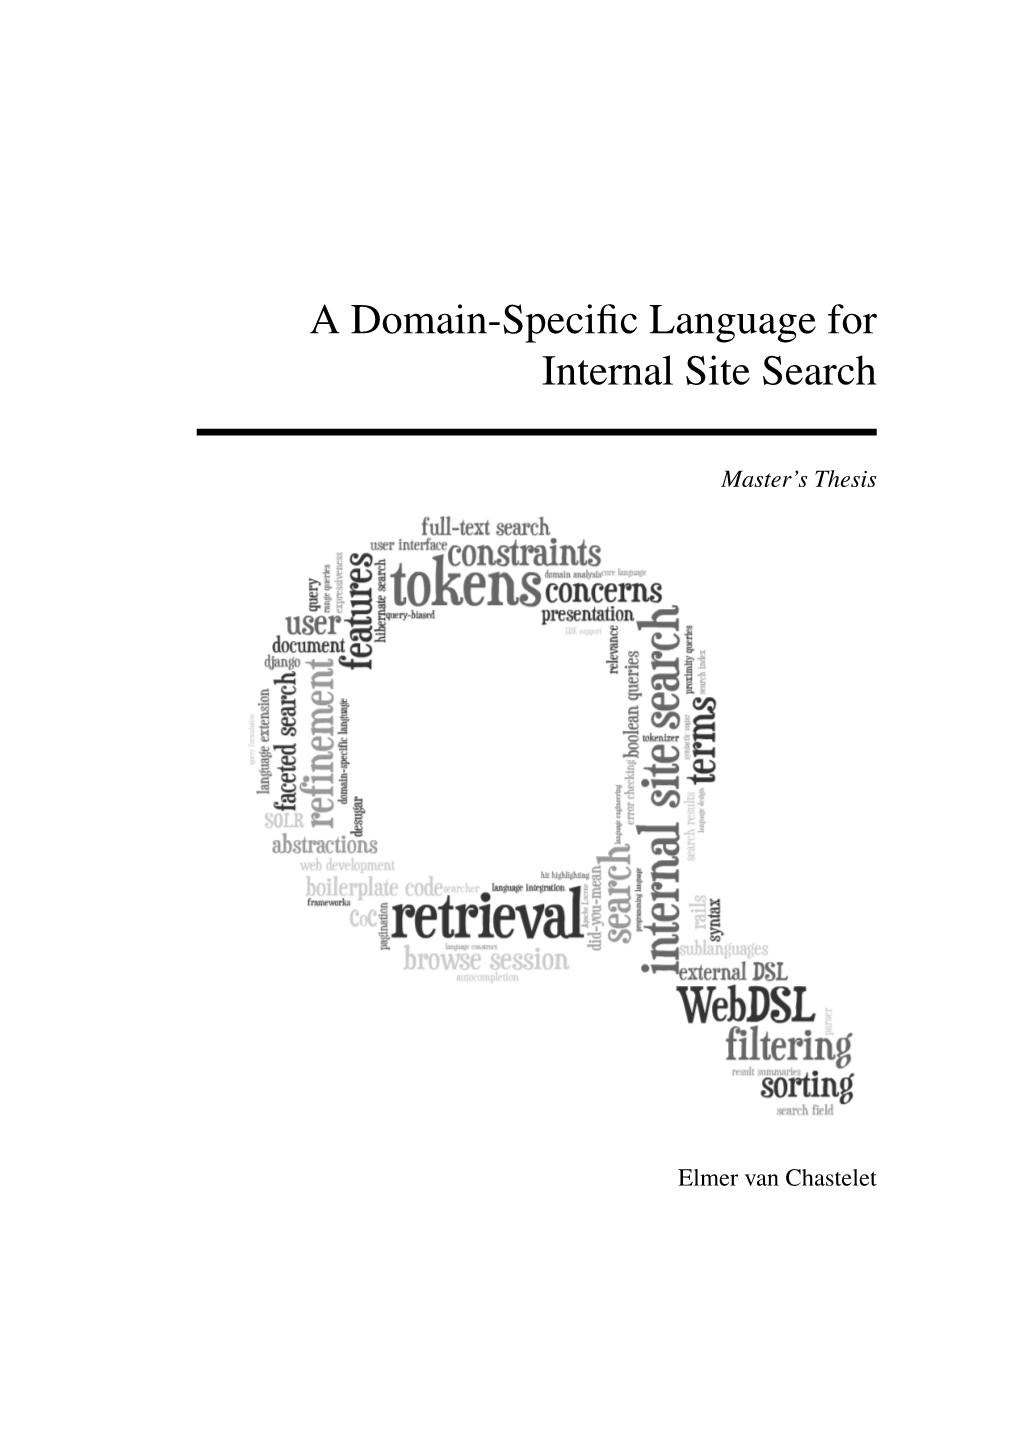 A Domain-Specific Language for Internal Site Search